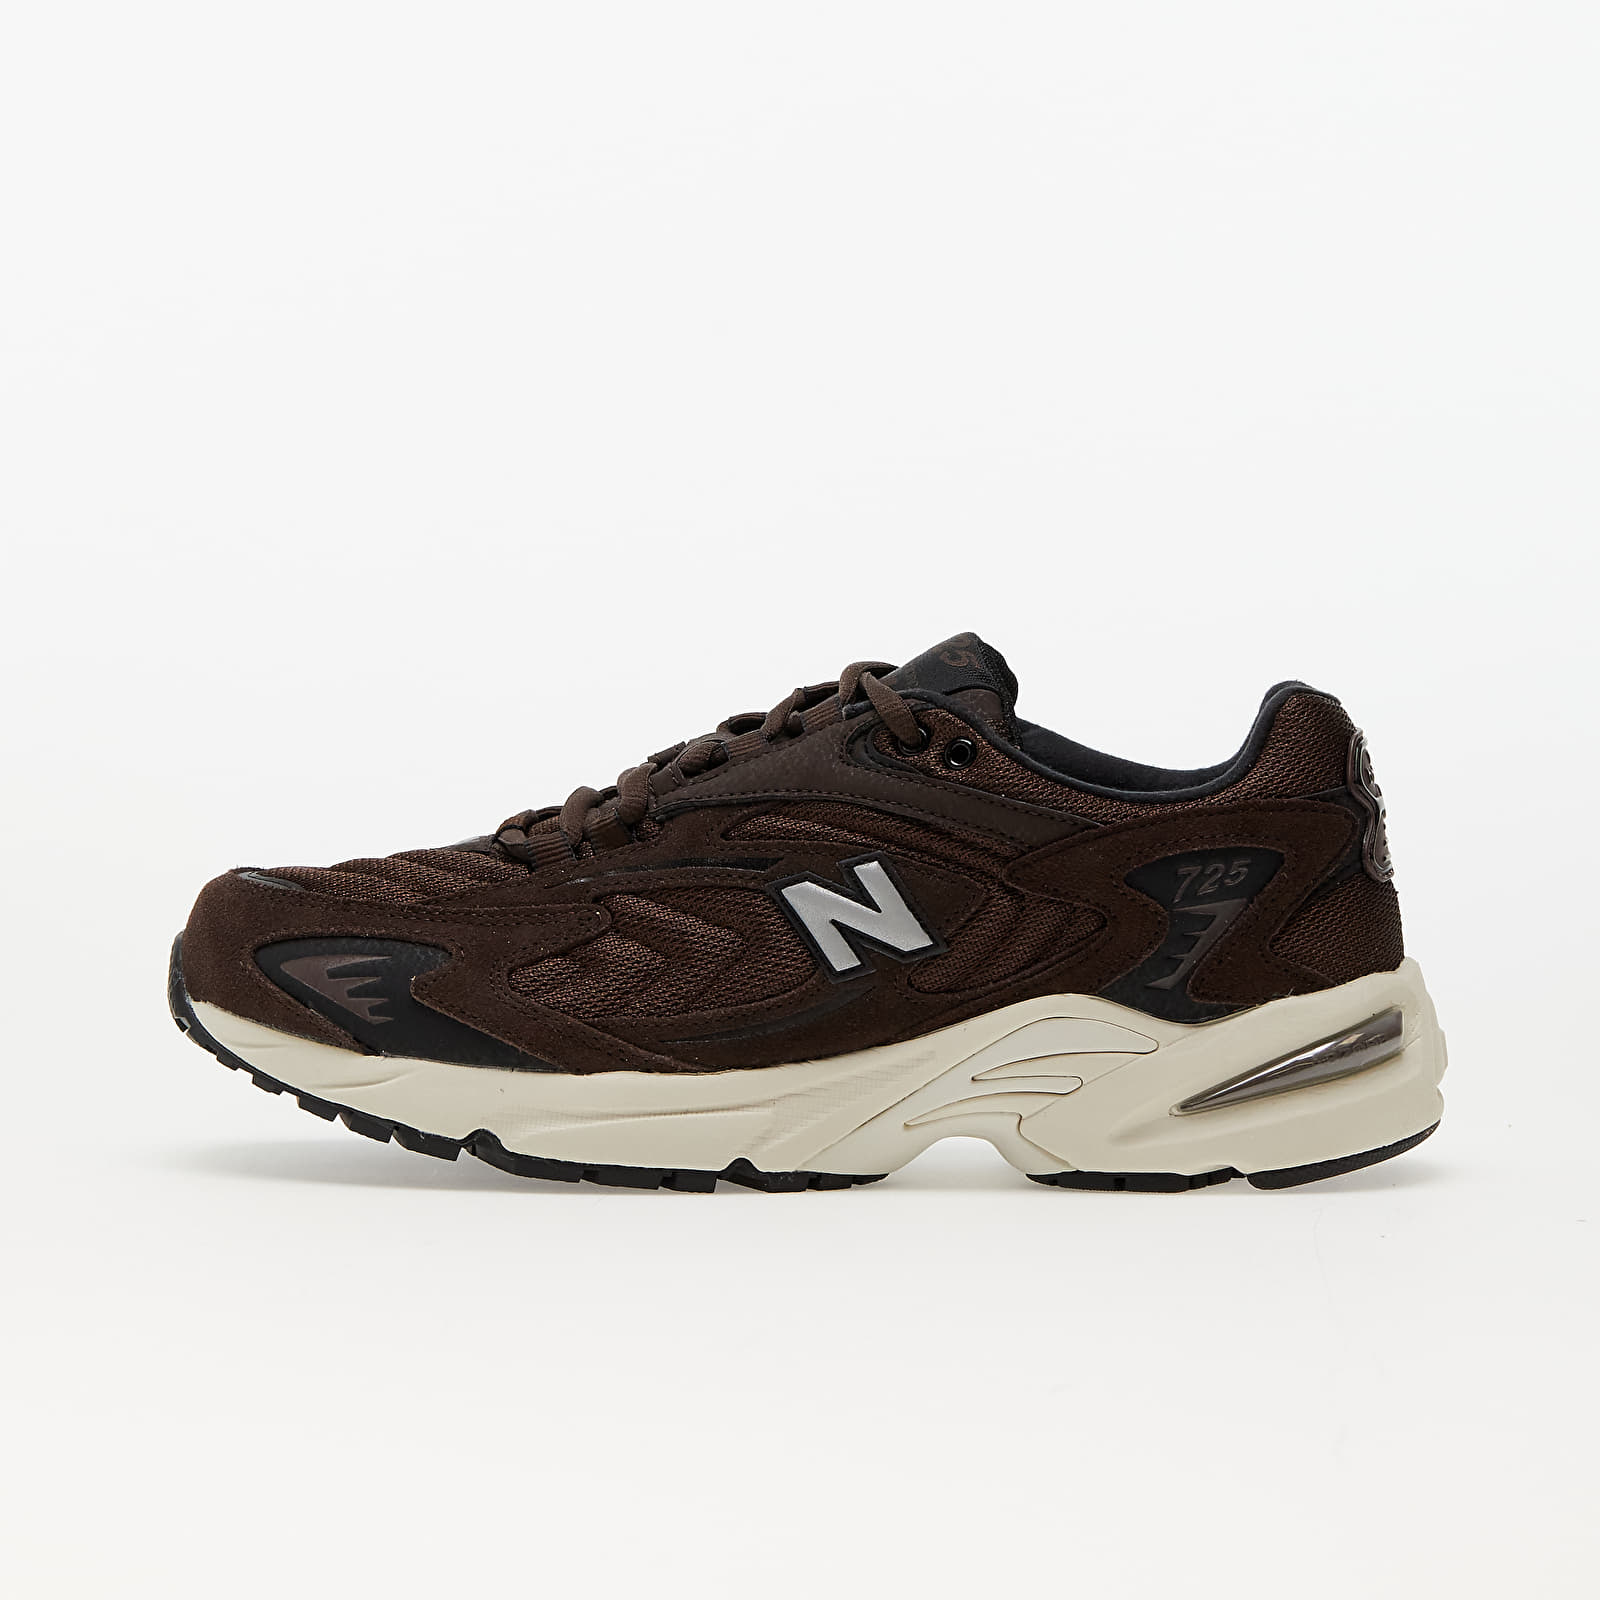 Chaussures et baskets homme New Balance 725 Black Coffee